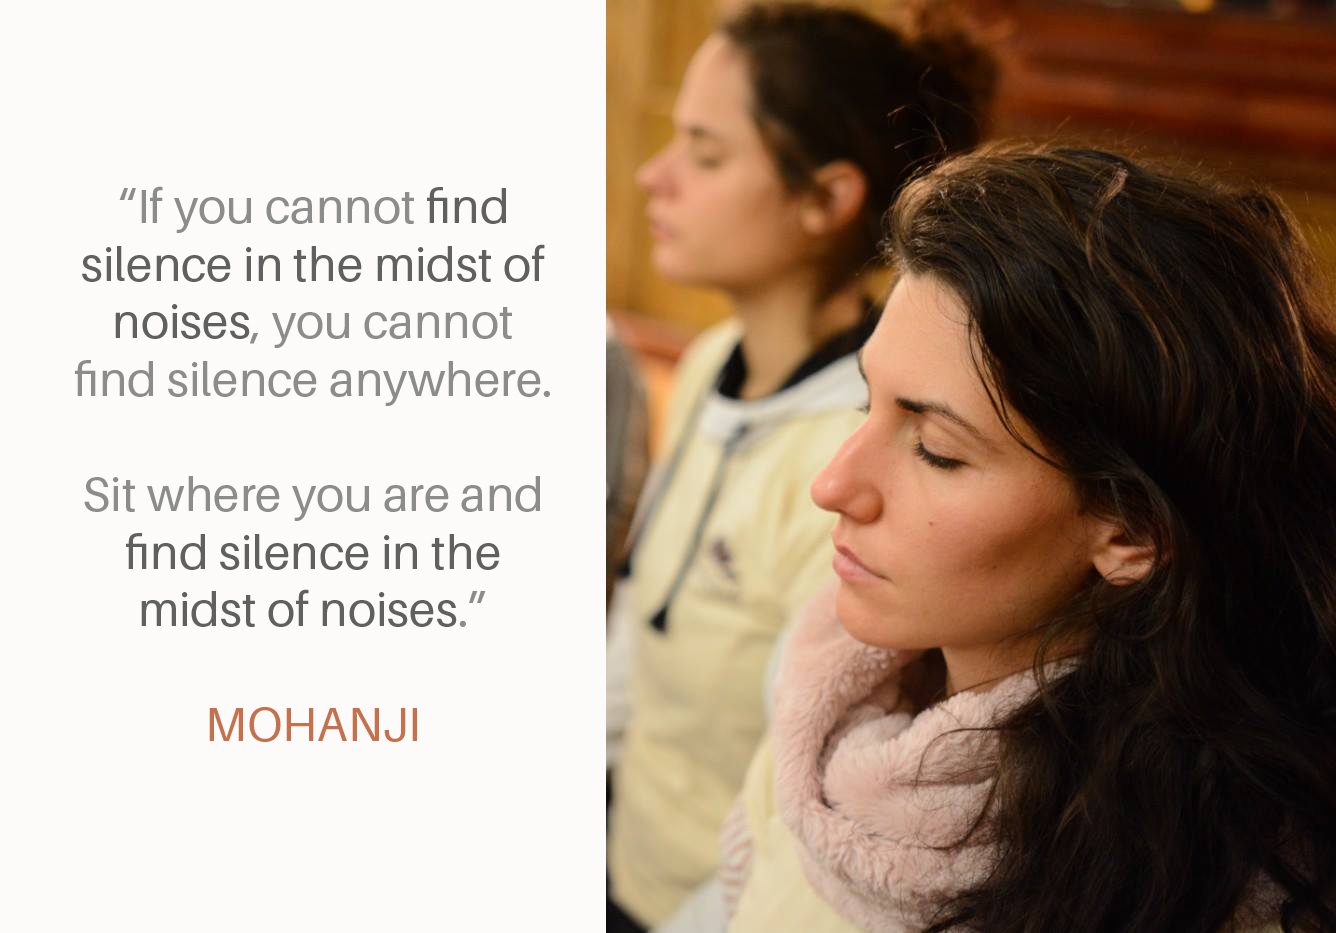 Mohanji quote - Find silence in the midst of noises